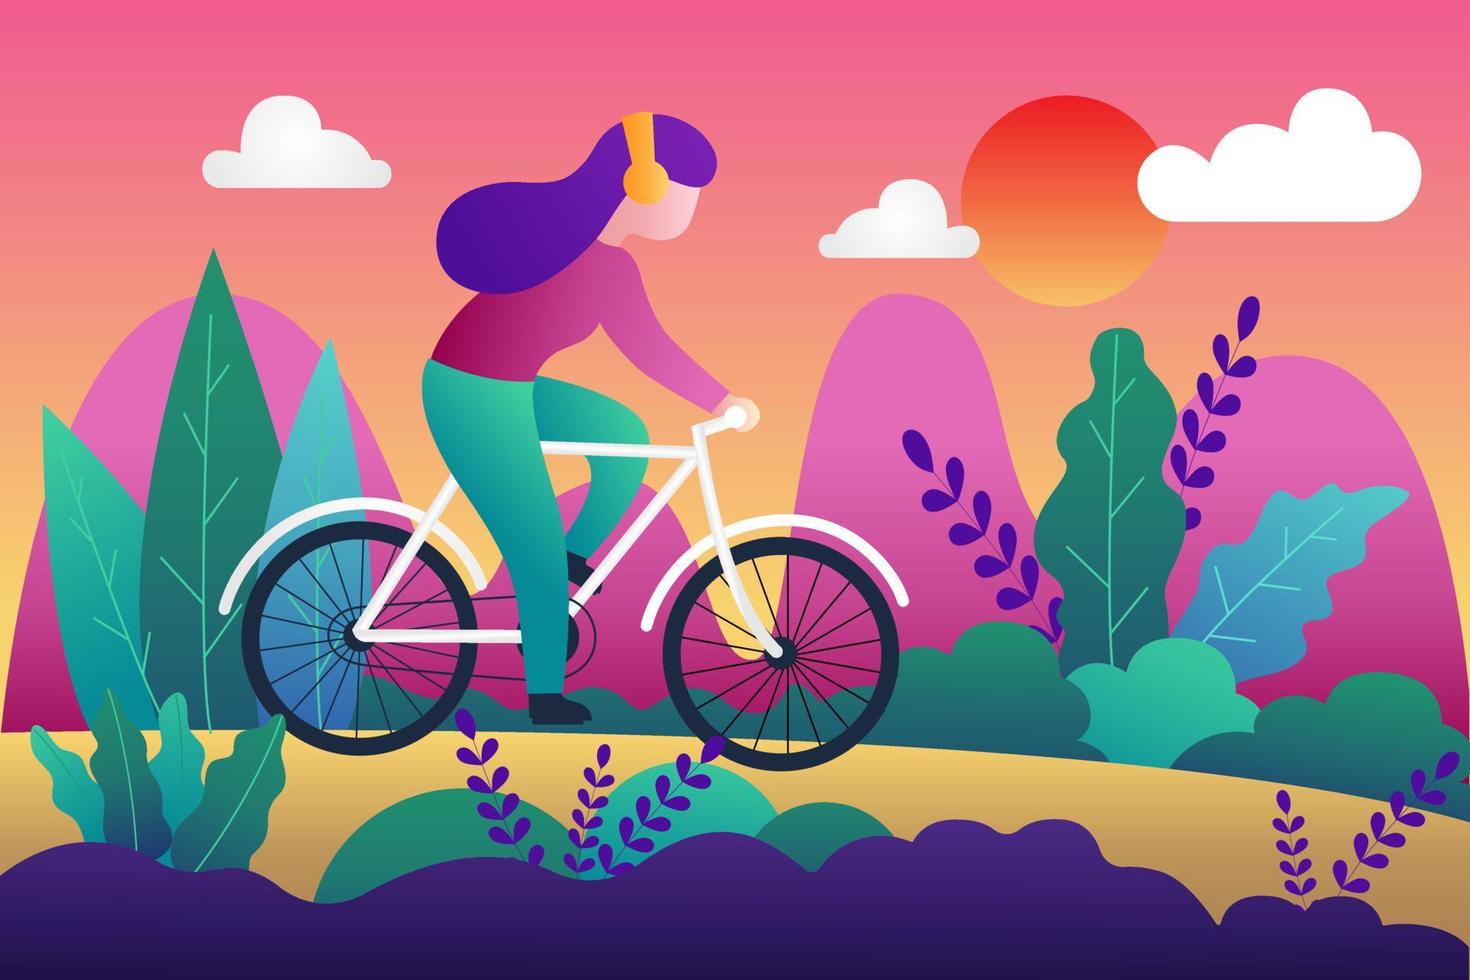 Bicycle riding girl or woman. Park, forest, trees and hills on background. vector